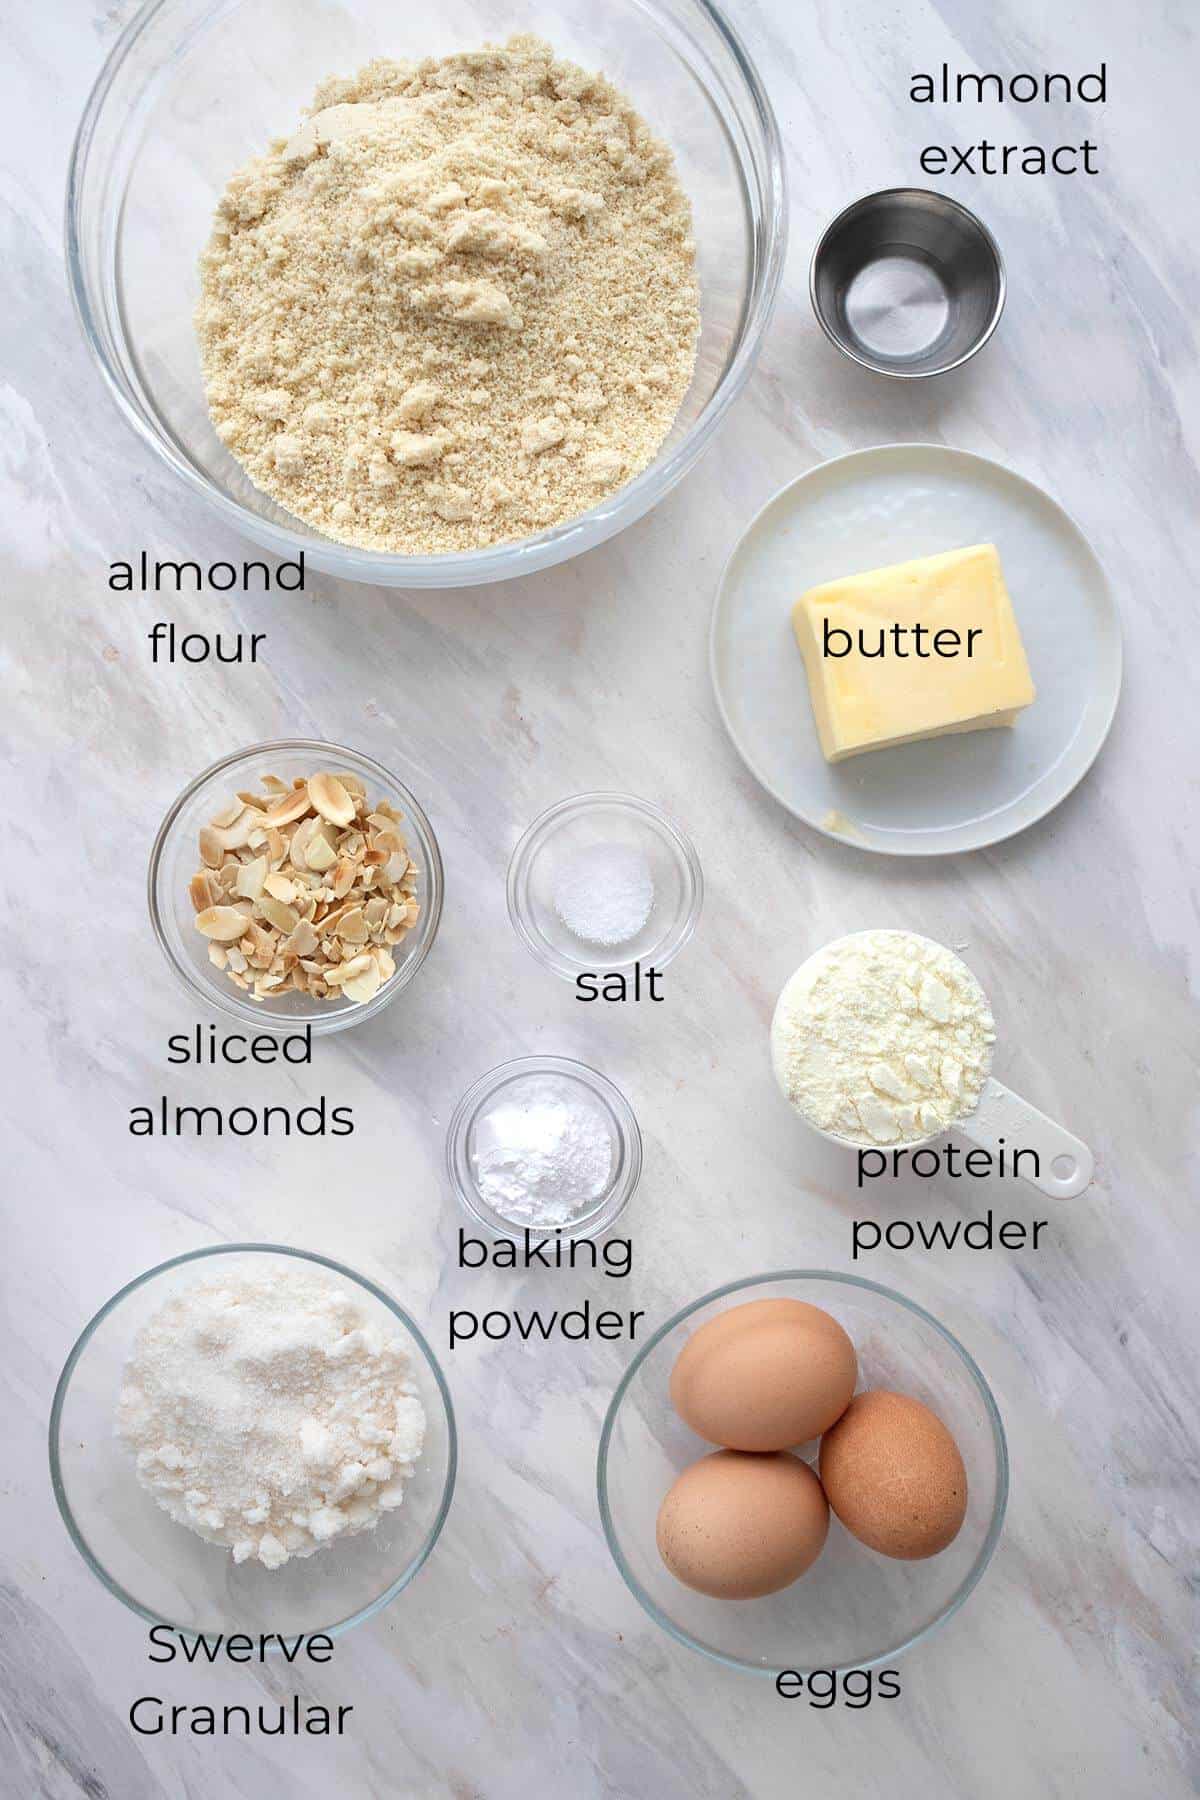 Top down image of ingredients for almond flour cake.